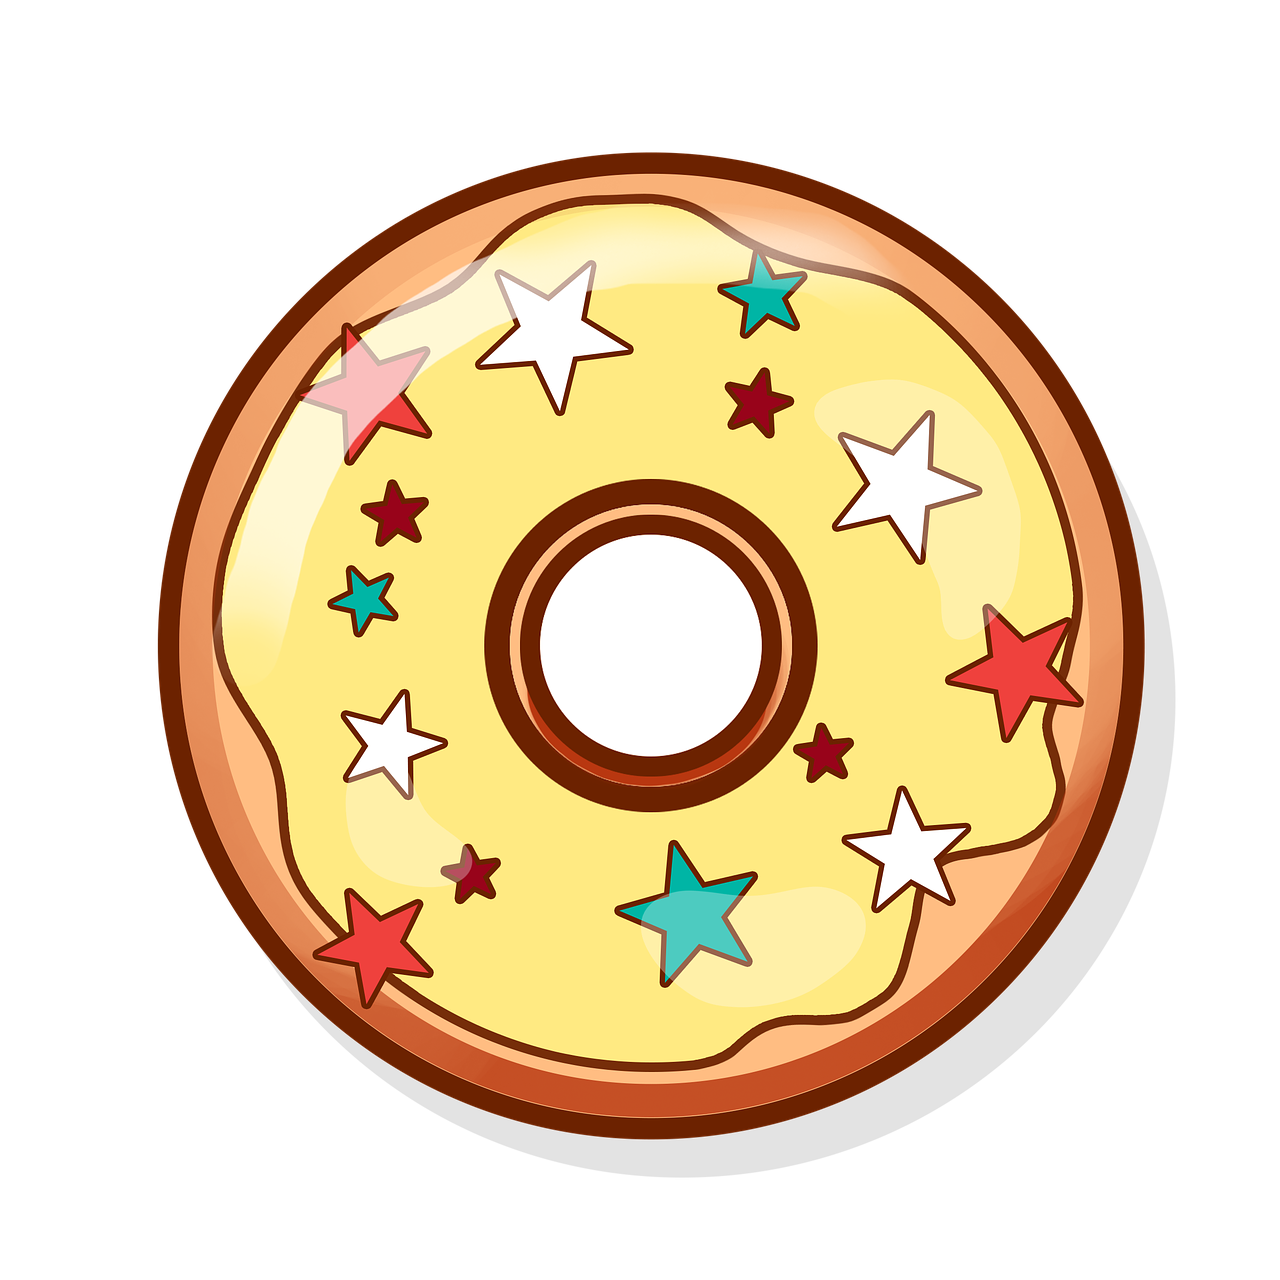 a close up of a doughnut with stars on it, vector art, on a flat color black background, mobile game asset, patch design, high detail illustration